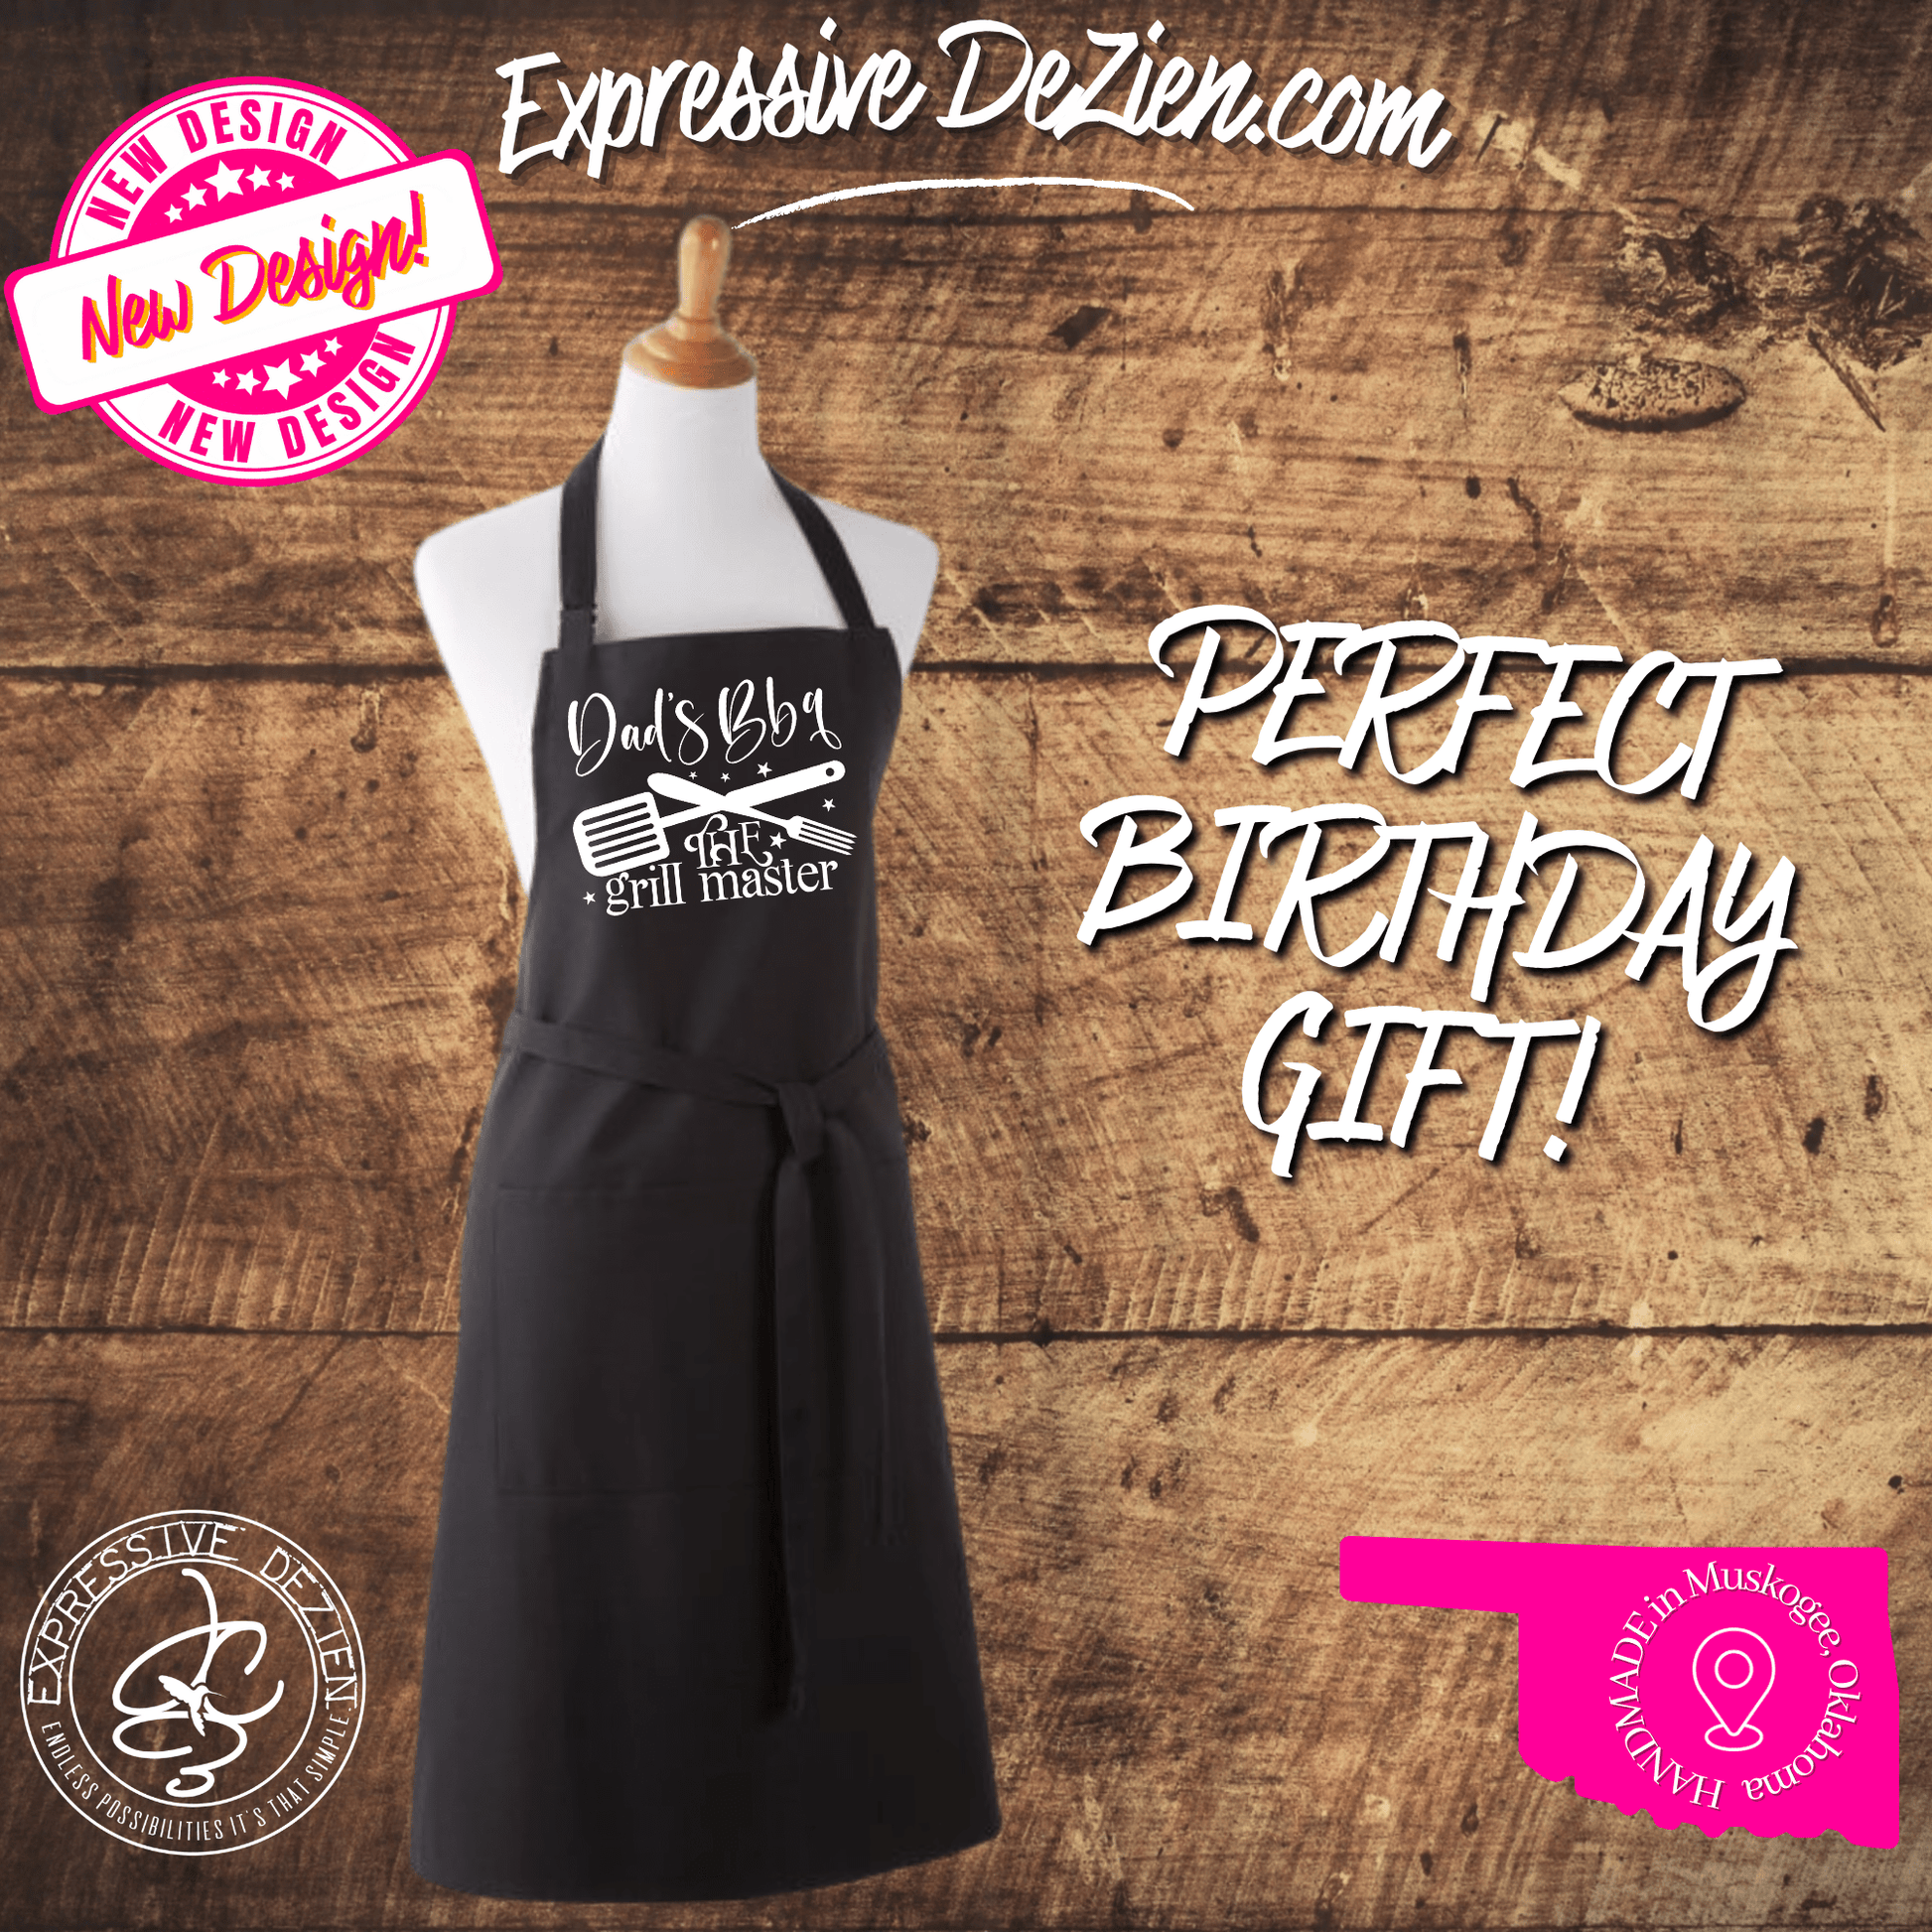 Grill like a Pro with Our 'Dads BBQ the Grill Master' Apron! - Expressive DeZien 